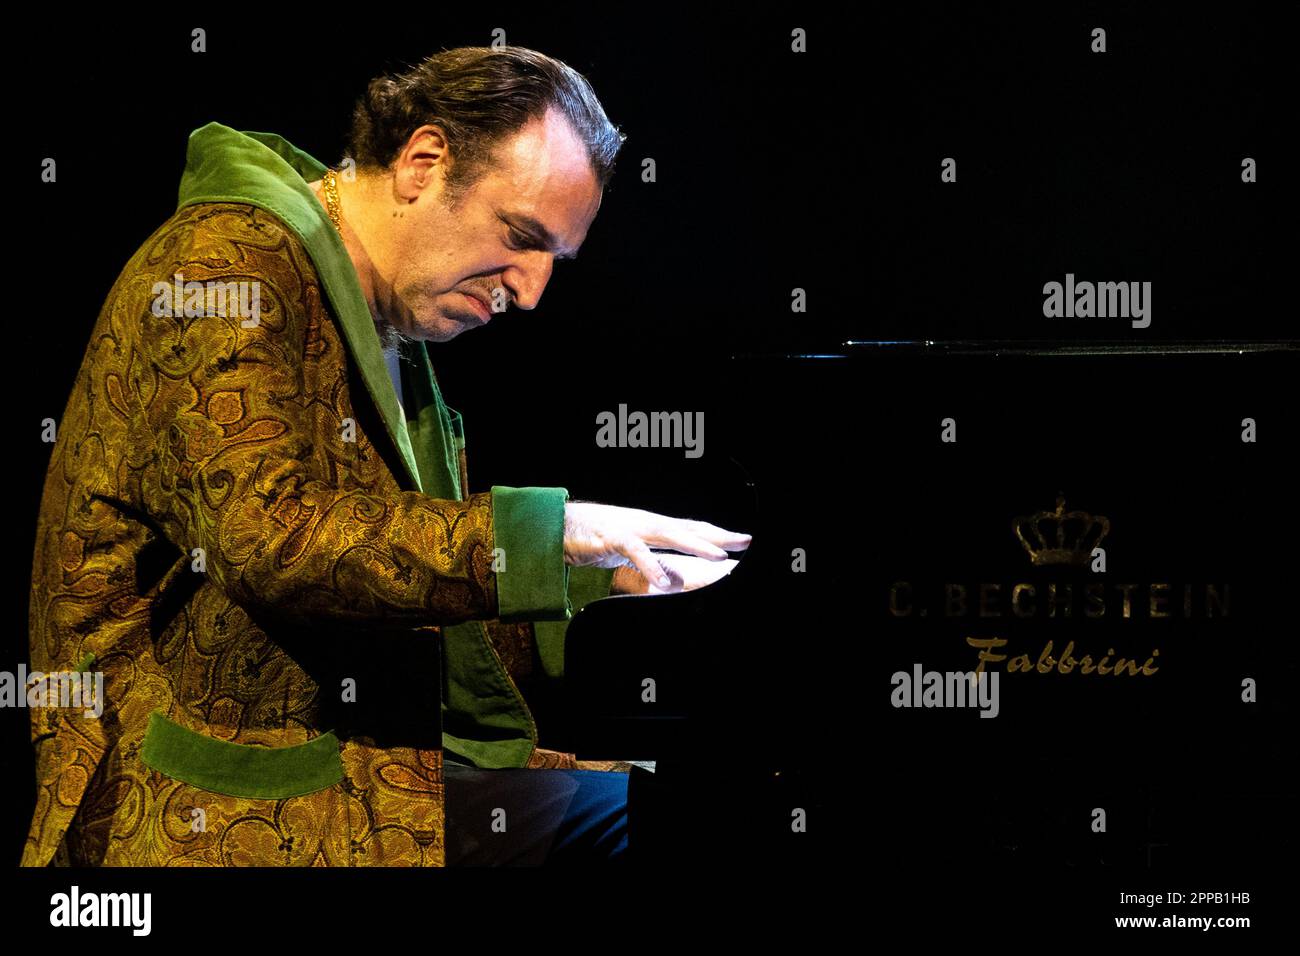 Canadian musician, songwriter, and producer Chilly Gonzales in concert at Teatro Lirico Giorgio GaberCanadian musician, songwriter, and producer Chilly Gonzales in concert at Teatro Lirico Giorgio Gaber Stock Photo